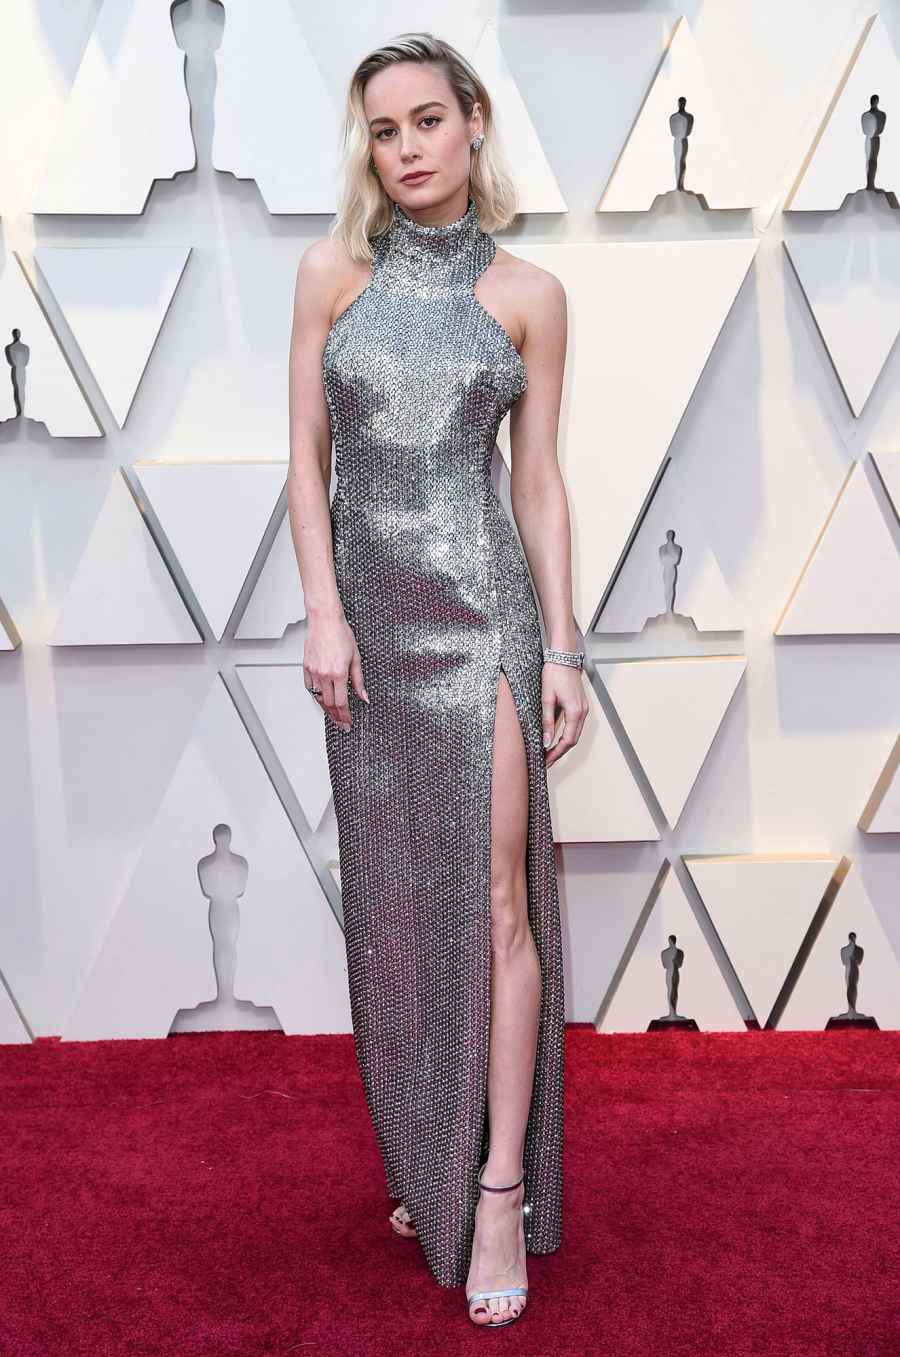 Brie Larson Most Googled Red Carpet Looks of 2019